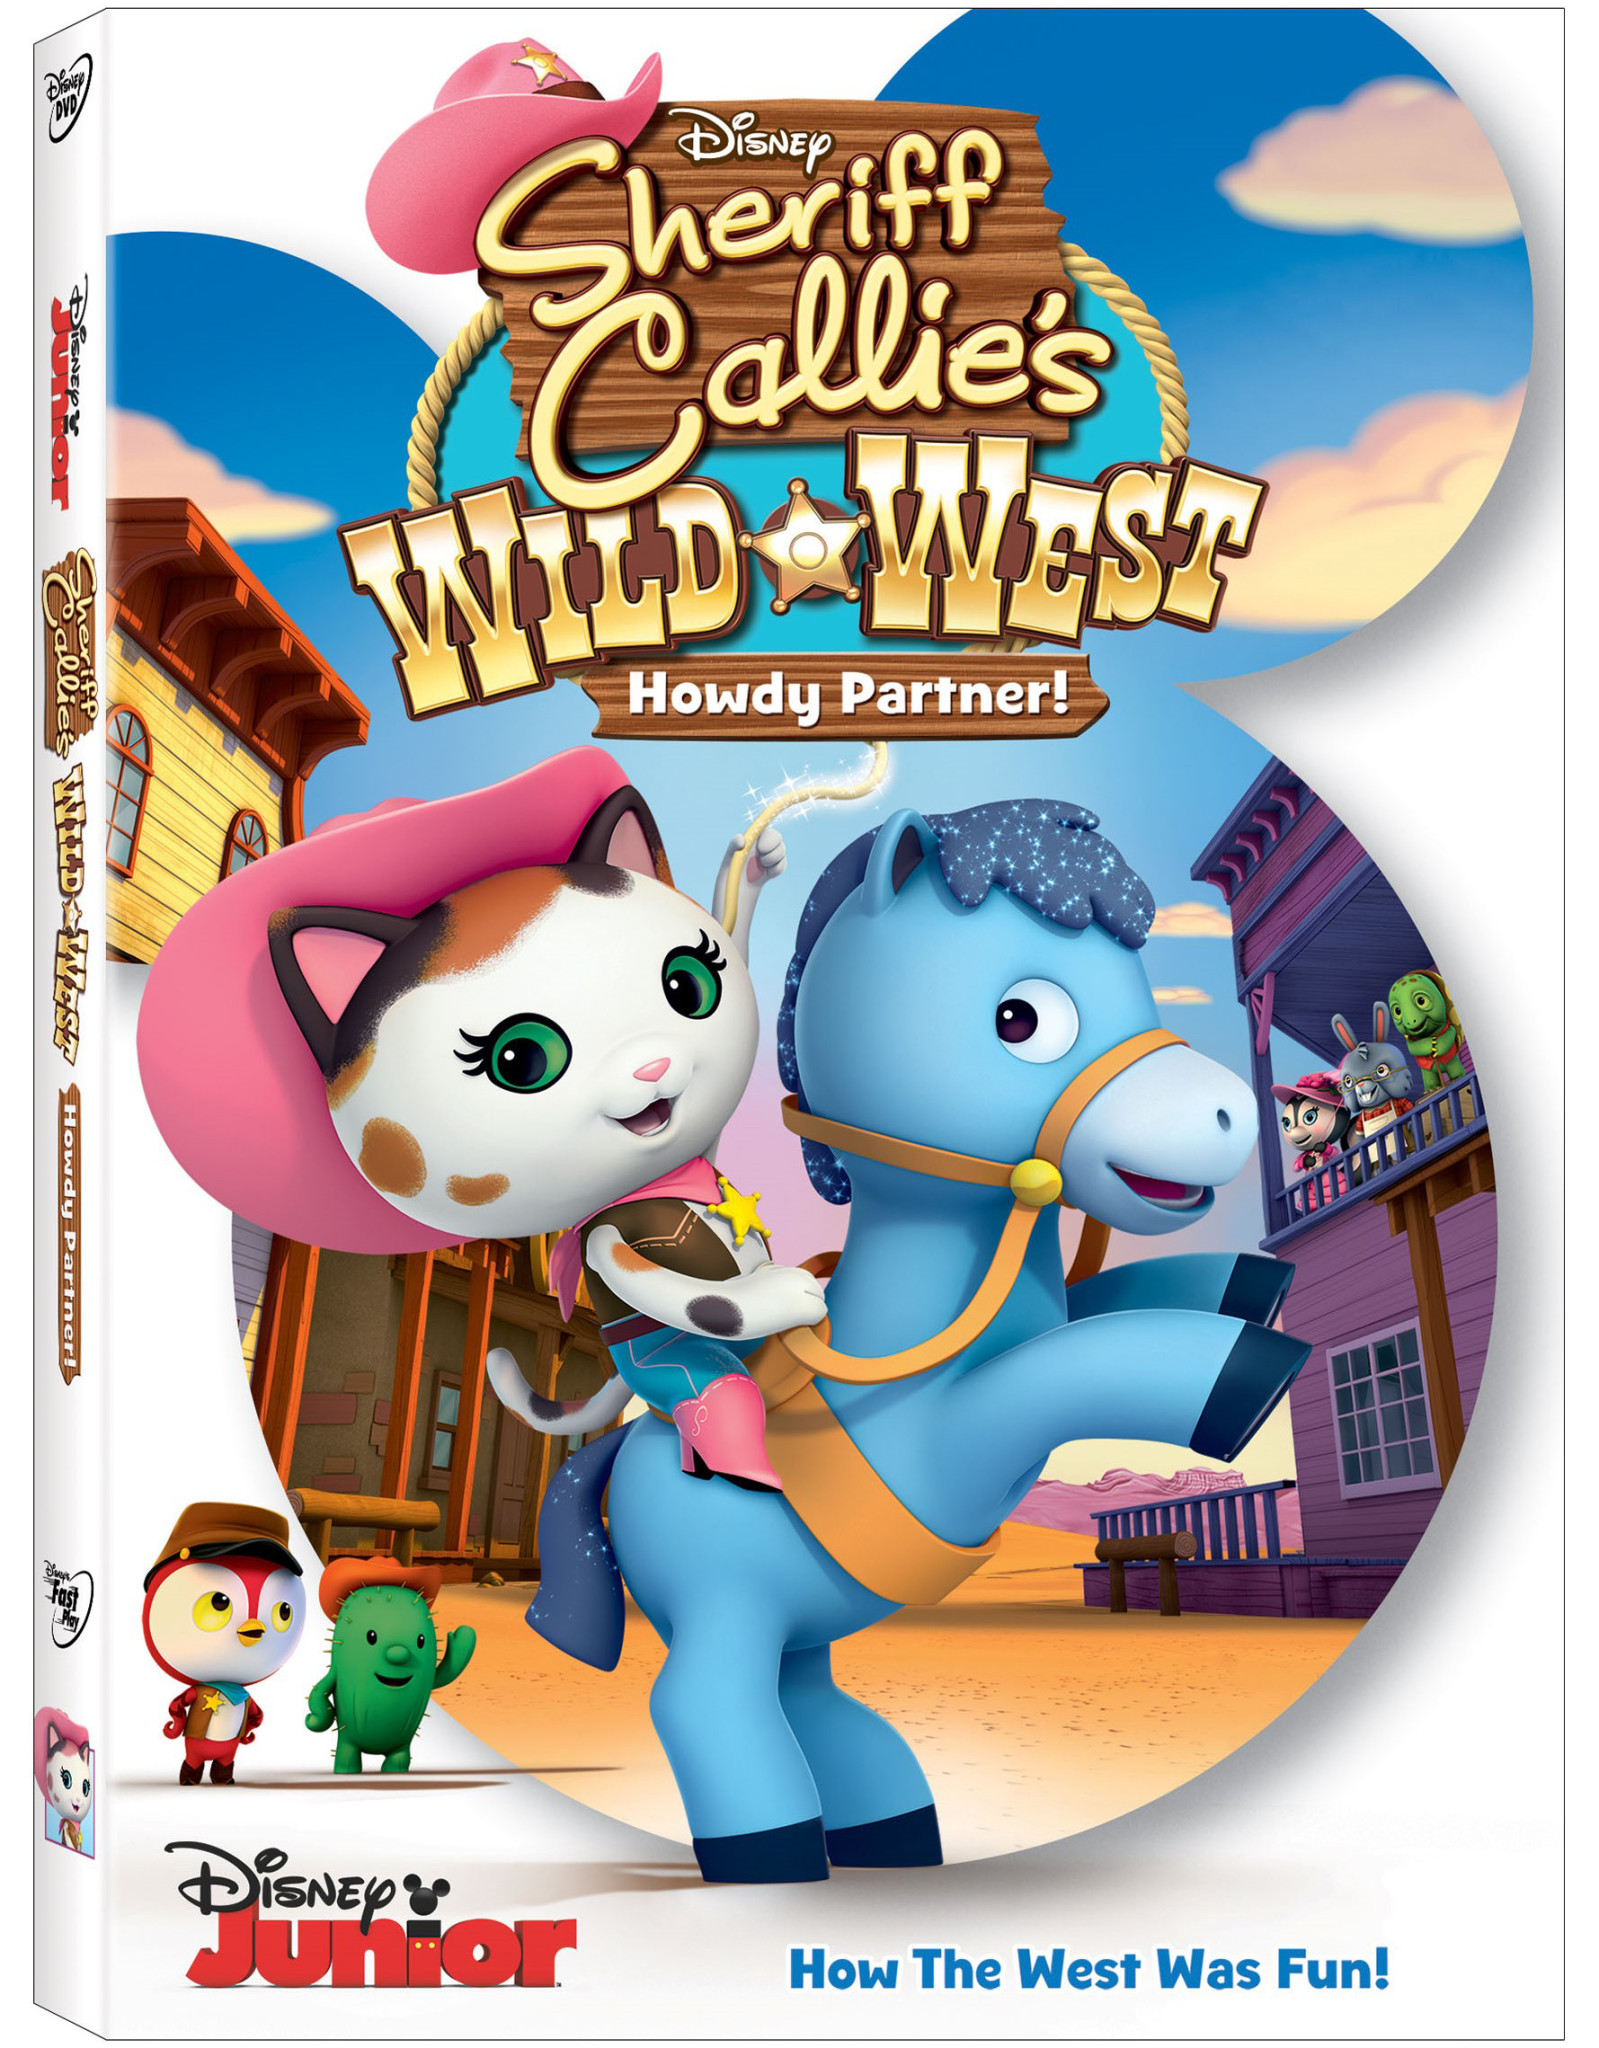 Sheriff Callie’s Wild West: Howdy Partner DVD is riding into town October 13th!